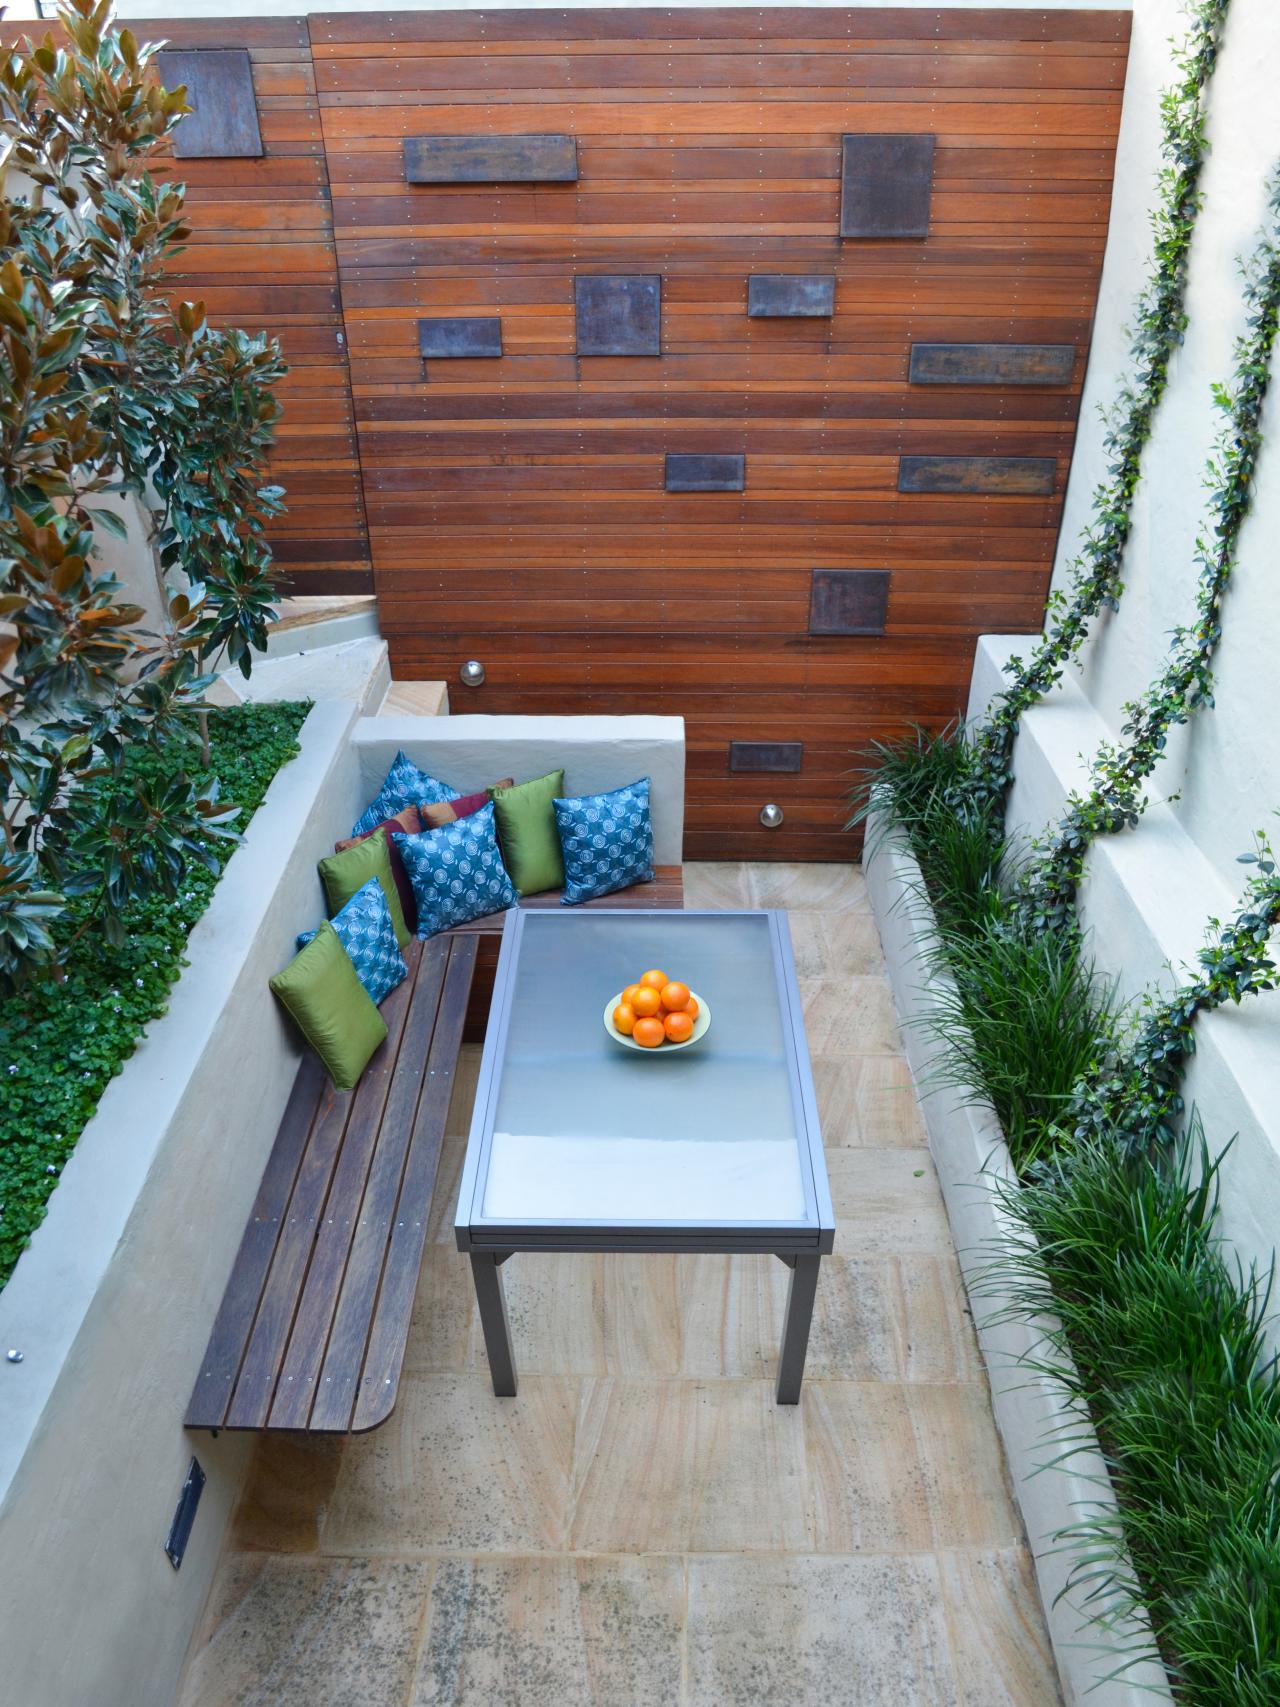 Pictures and Tips for Small Patios | Outdoor Design ...